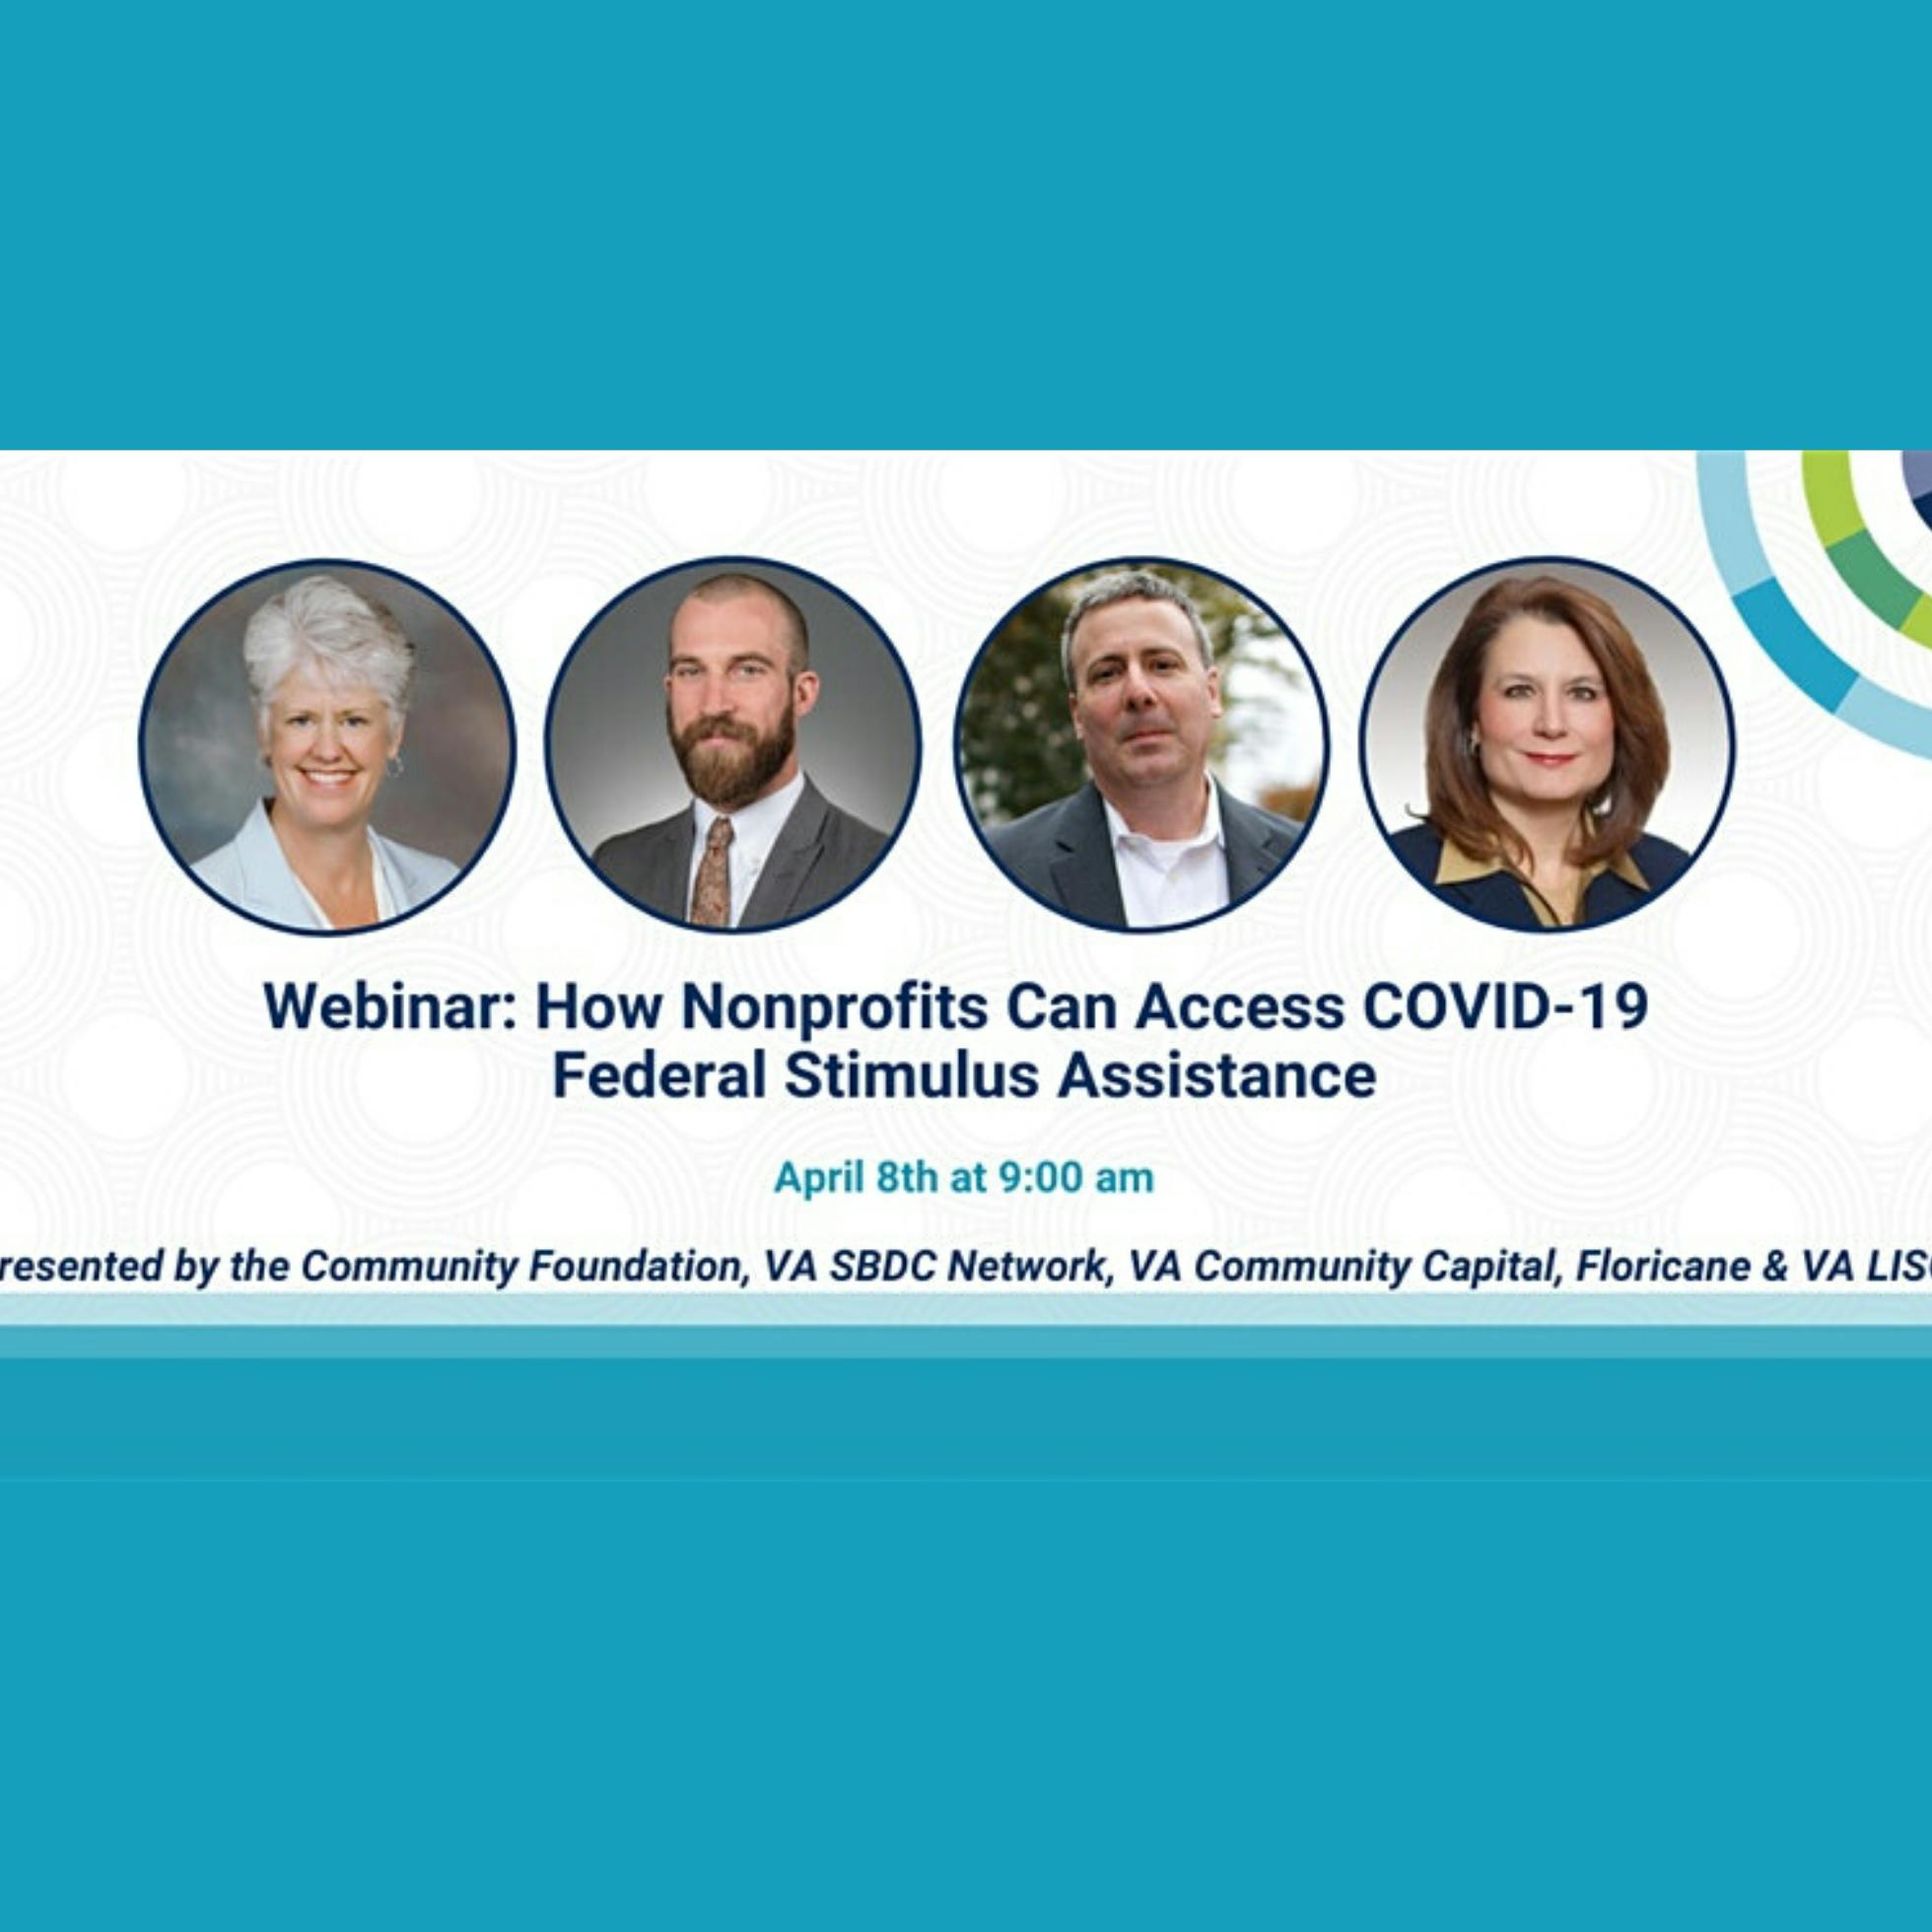 Webinar: How Nonprofits Can Access COVID-19 Federal Stimulus Assistance